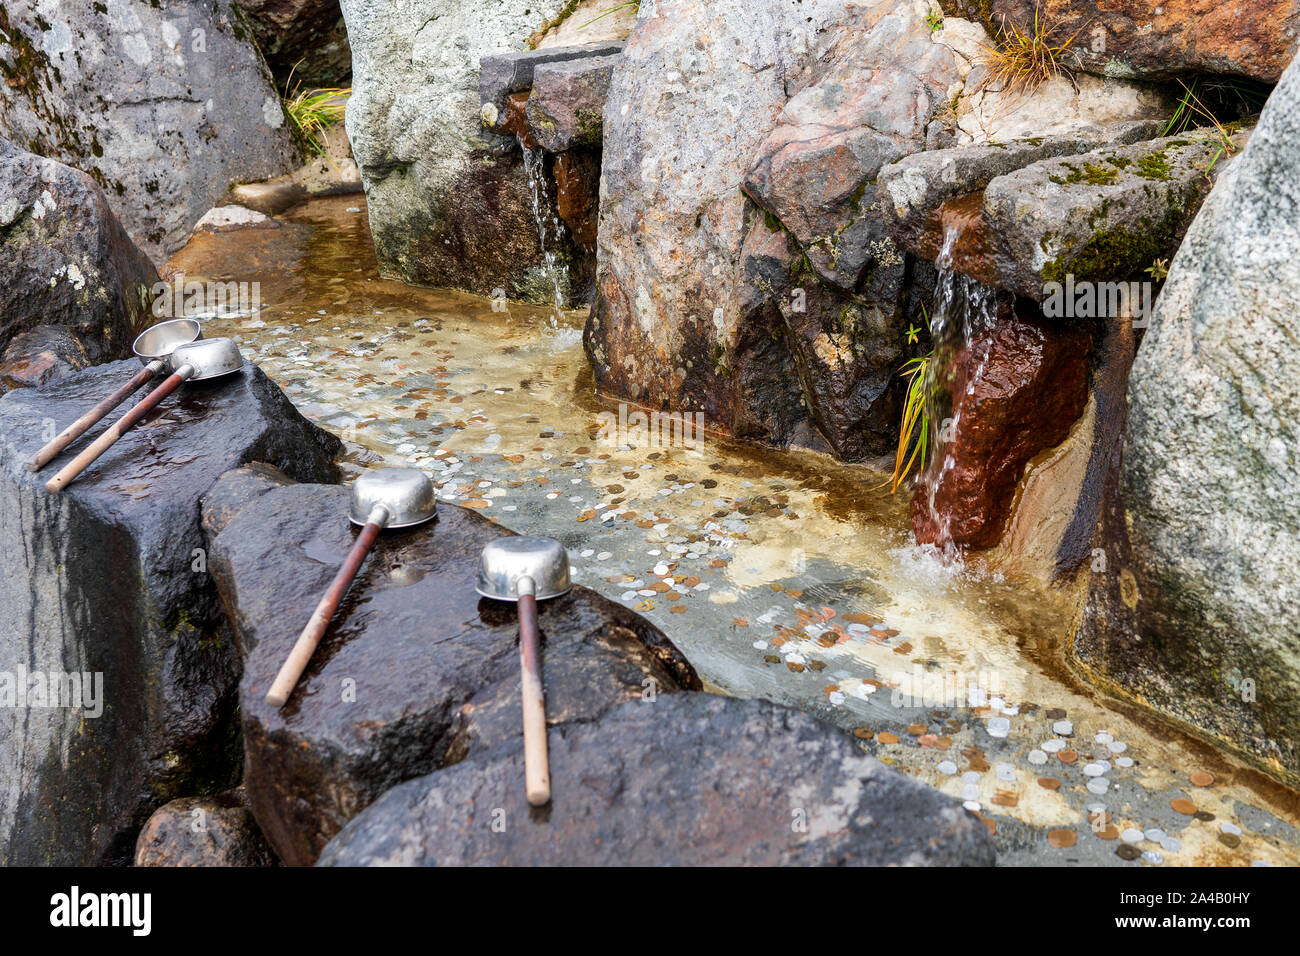 Ladles Or Dipper And Drinkable Water Source Pool Full Of Coins. Stock Photo